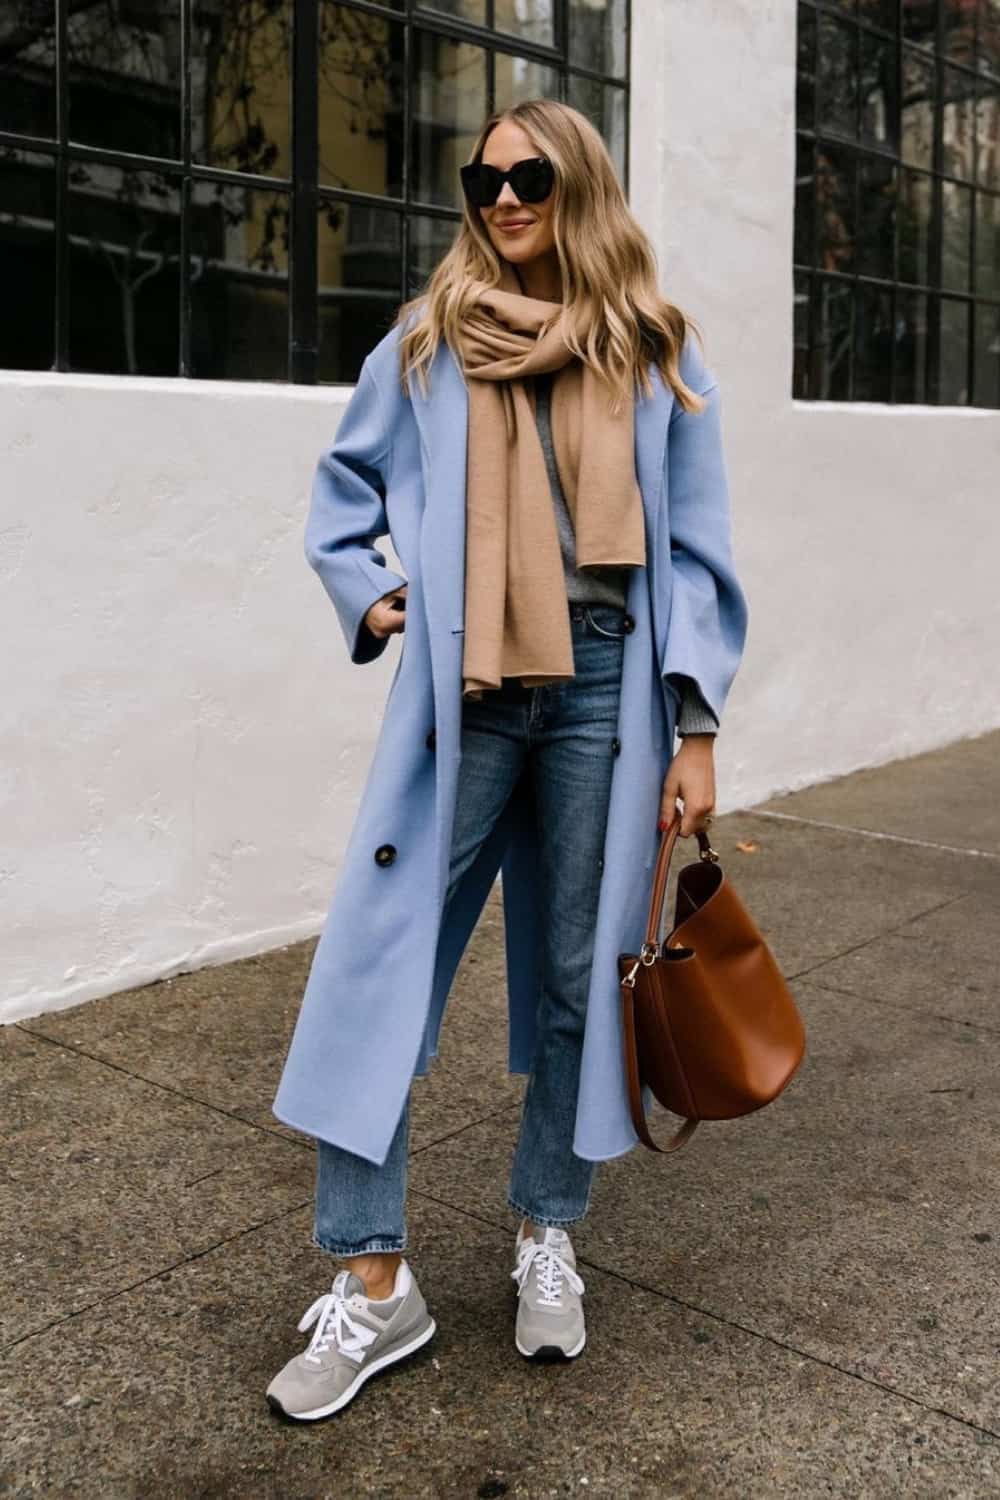 casual work outfits with sneakers - Blue coat and jeans